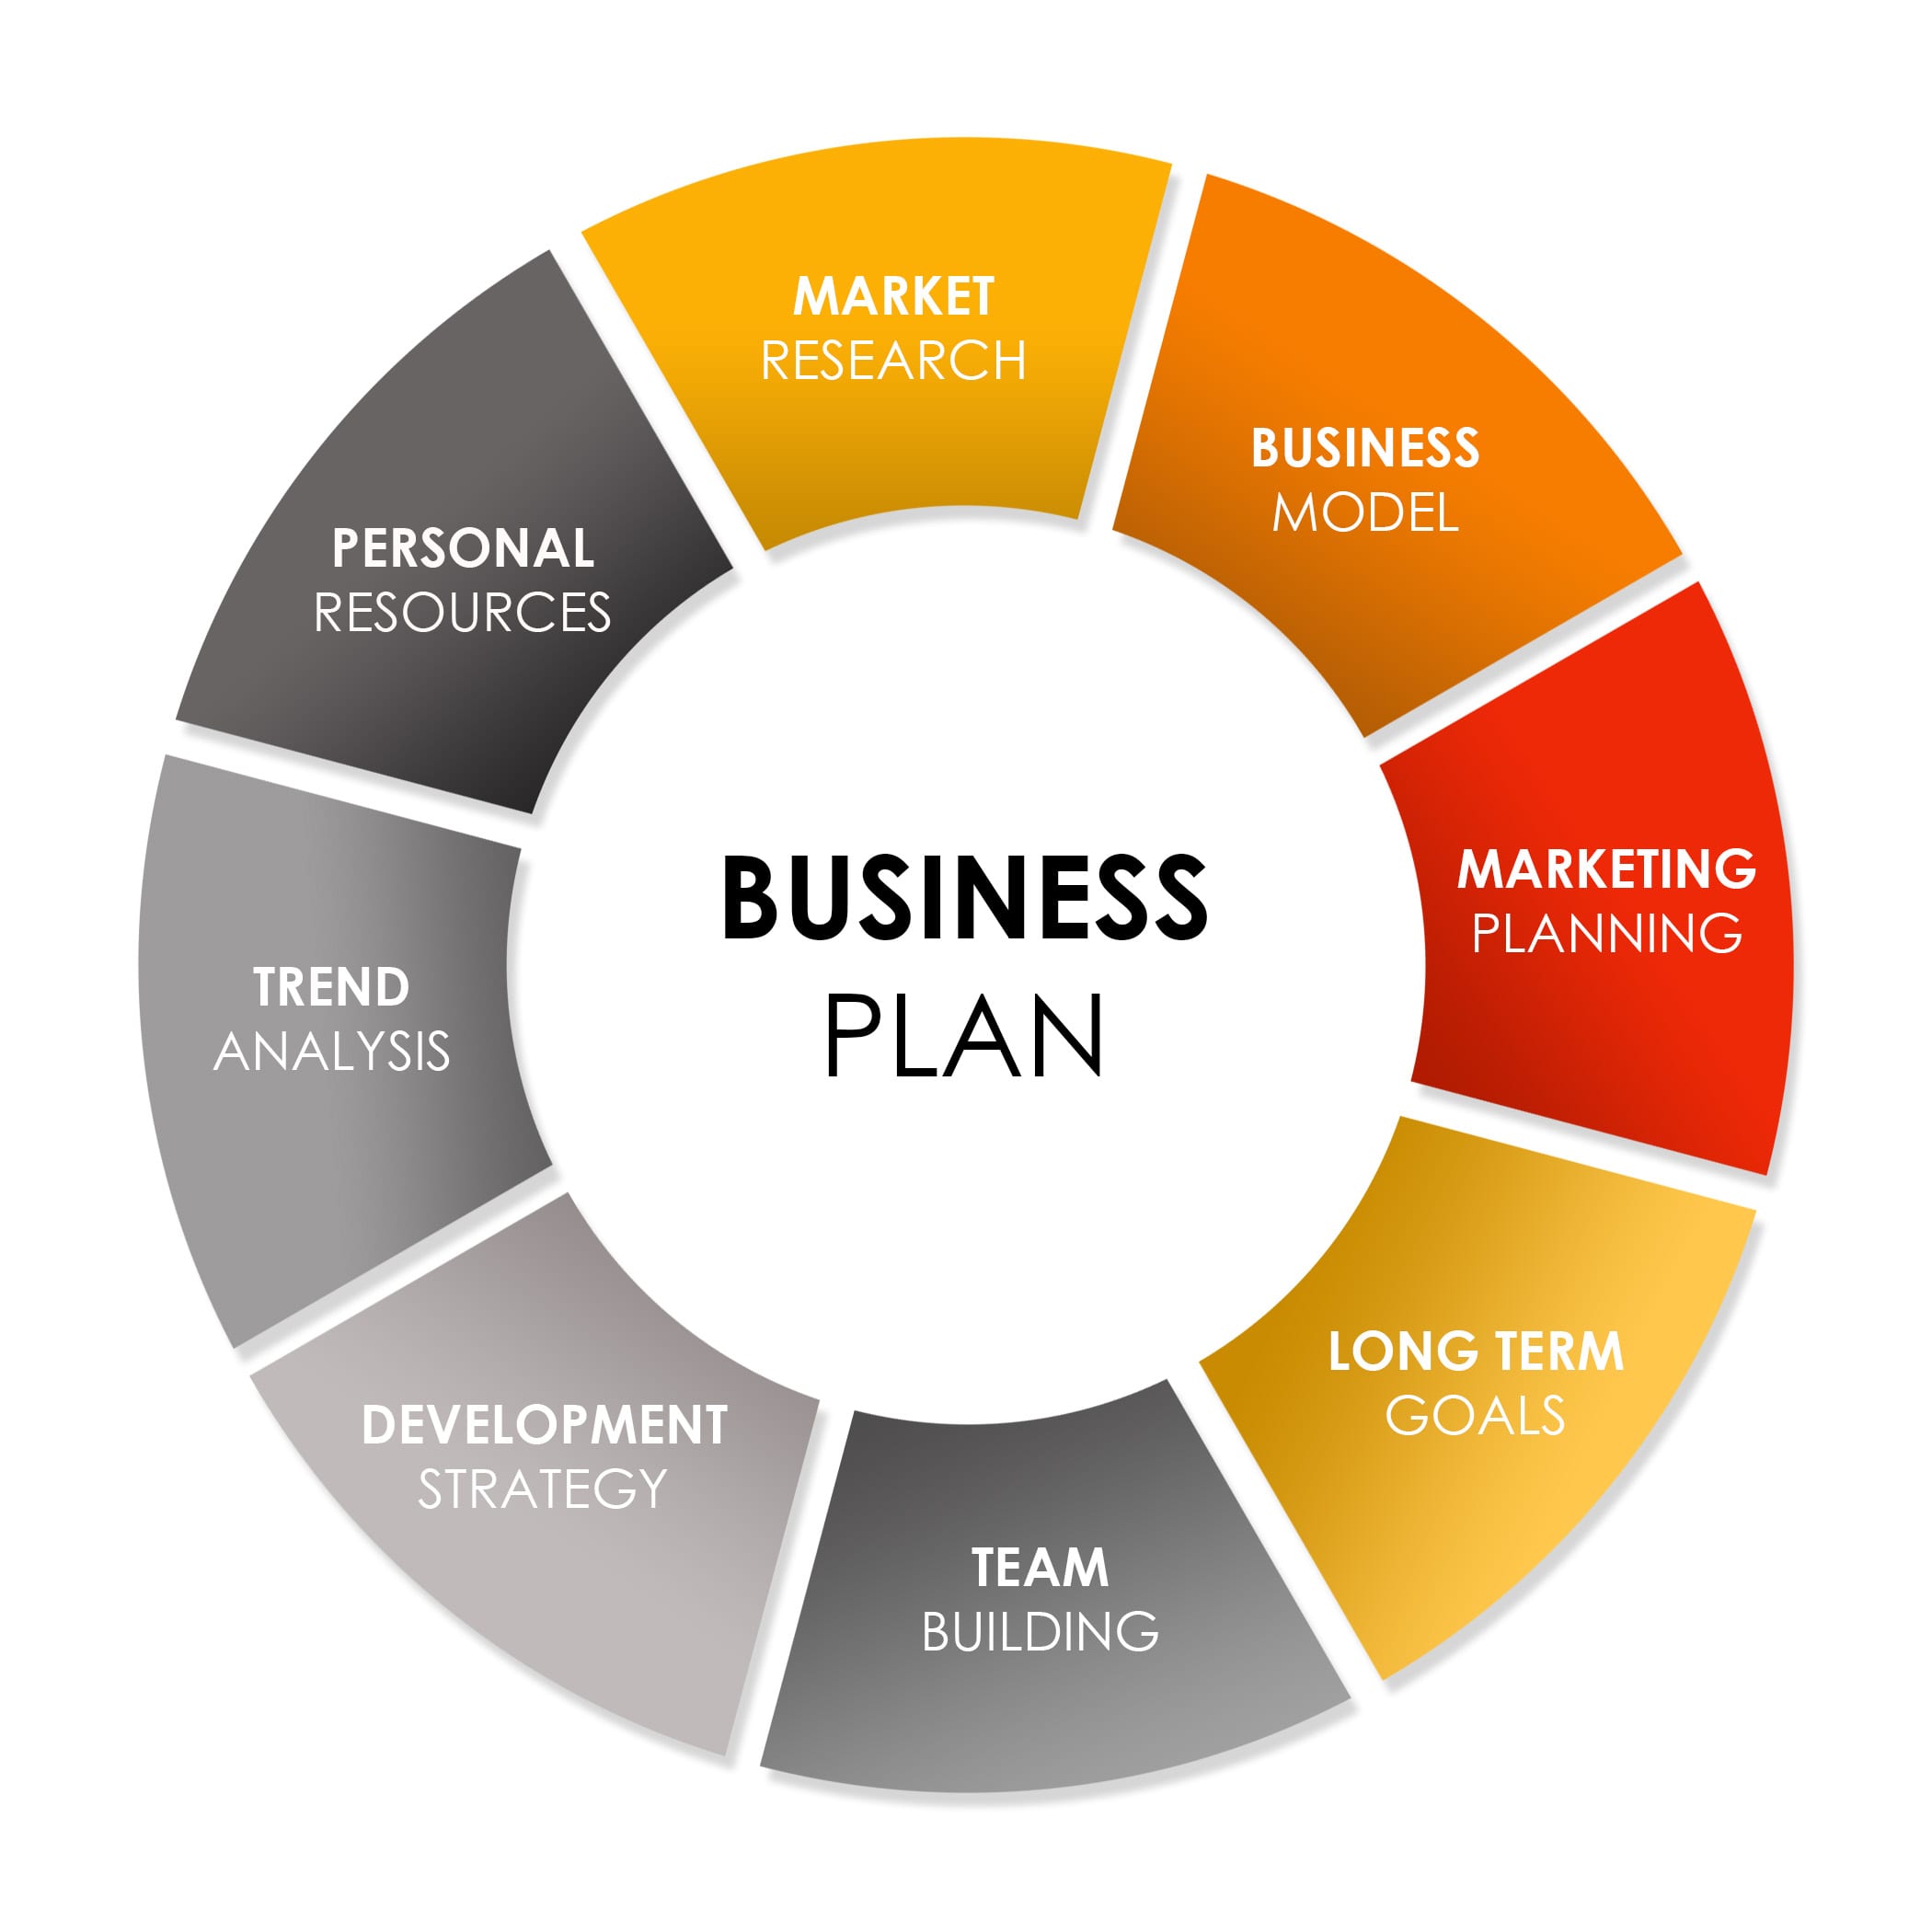 le business plan meaning